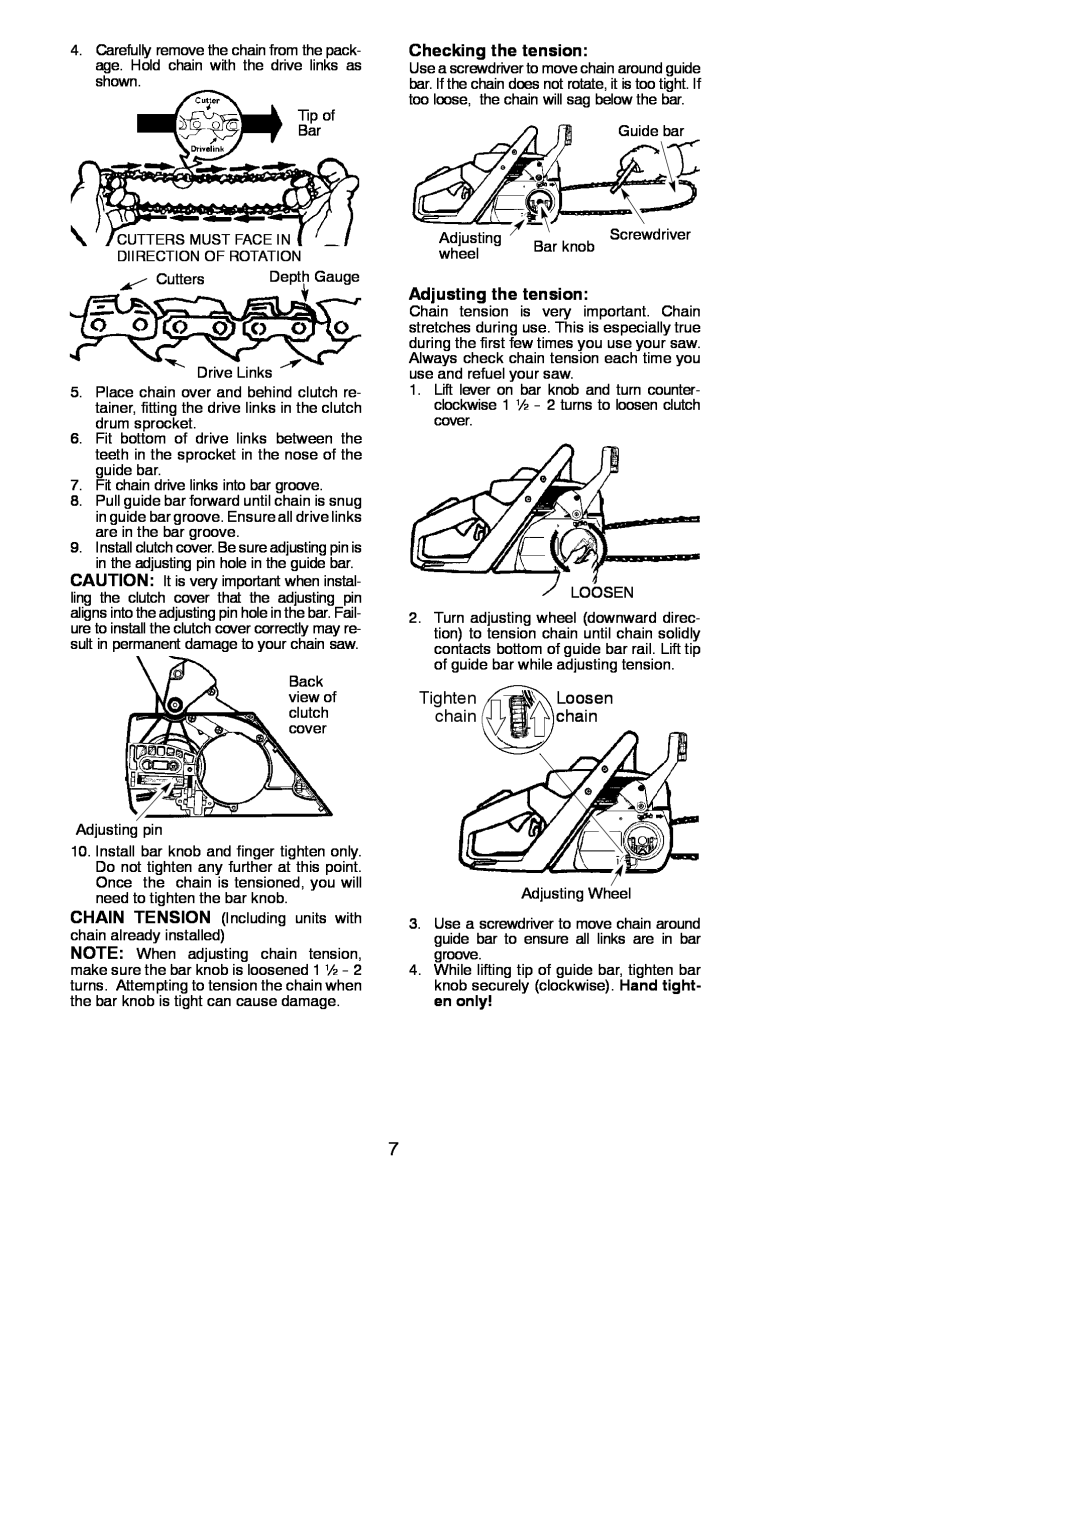 Poulan 545123817 instruction manual Checking the tension, Adjusting the tension, Tighten Loosen chain chain 